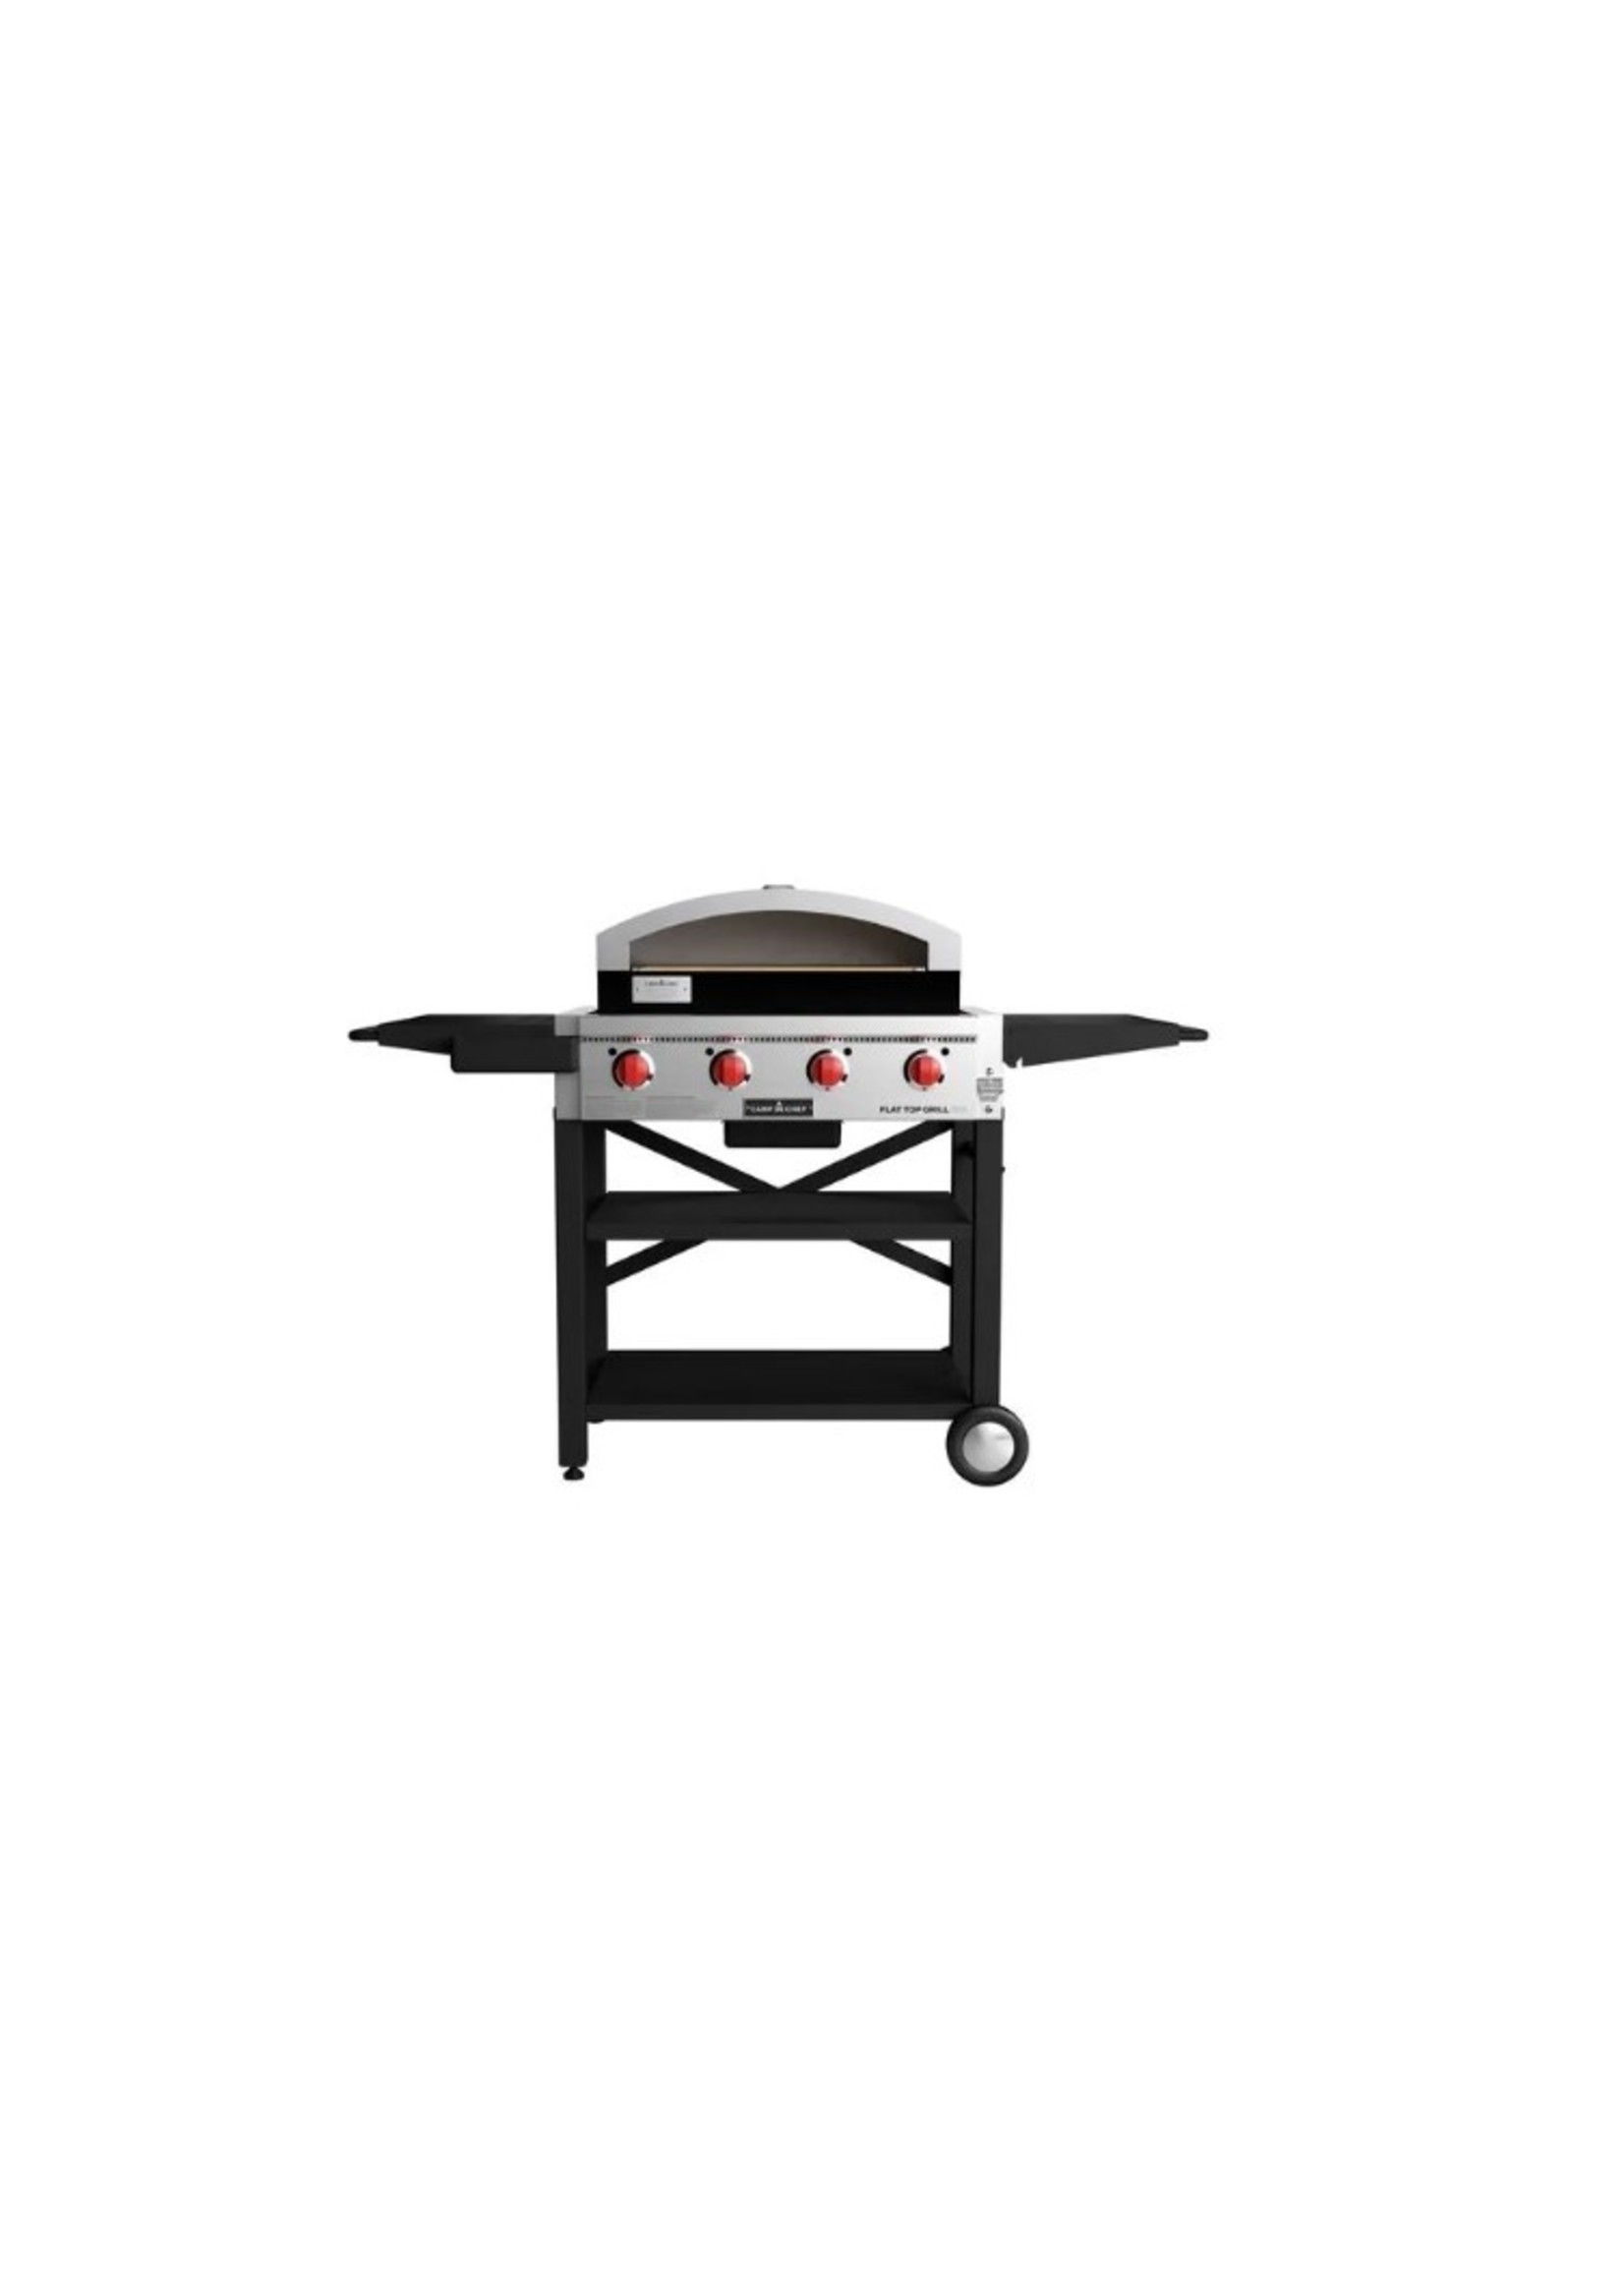 Camp Chef Camp Chef Flat Top 600 Pizza Oven